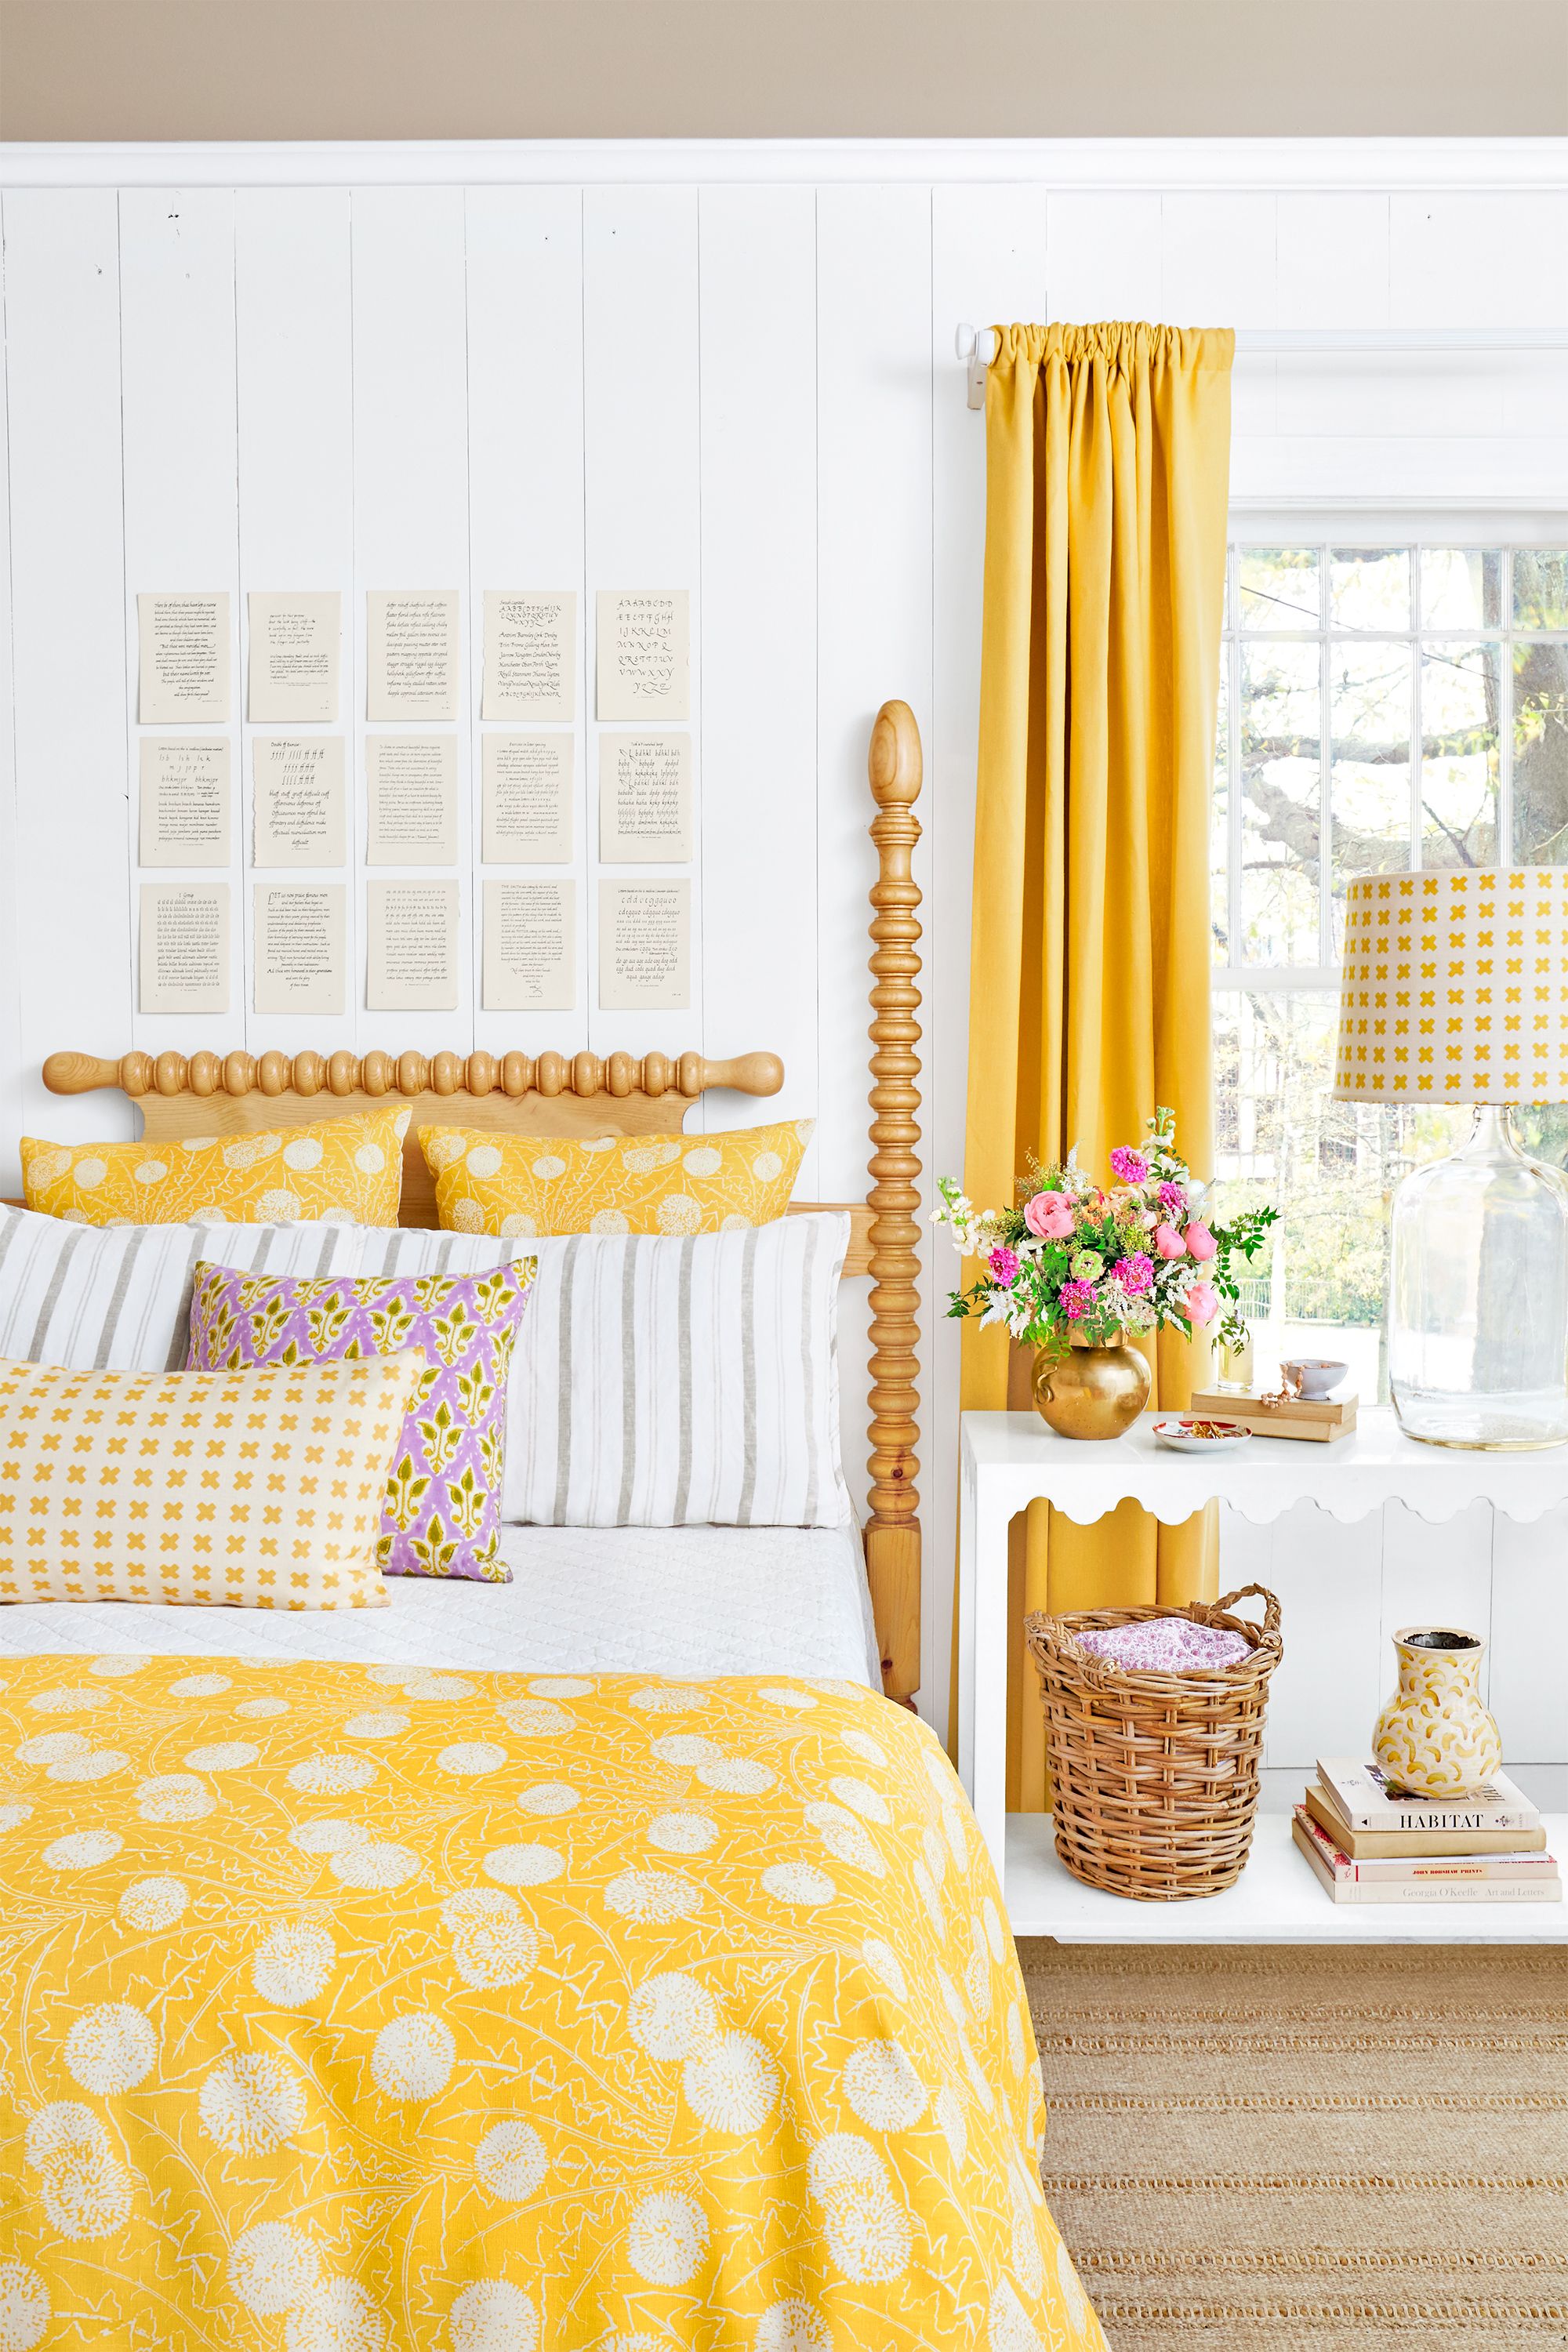 15 Cheerful Yellow Bedrooms - Chic Ideas For Yellow Bedroom Decor